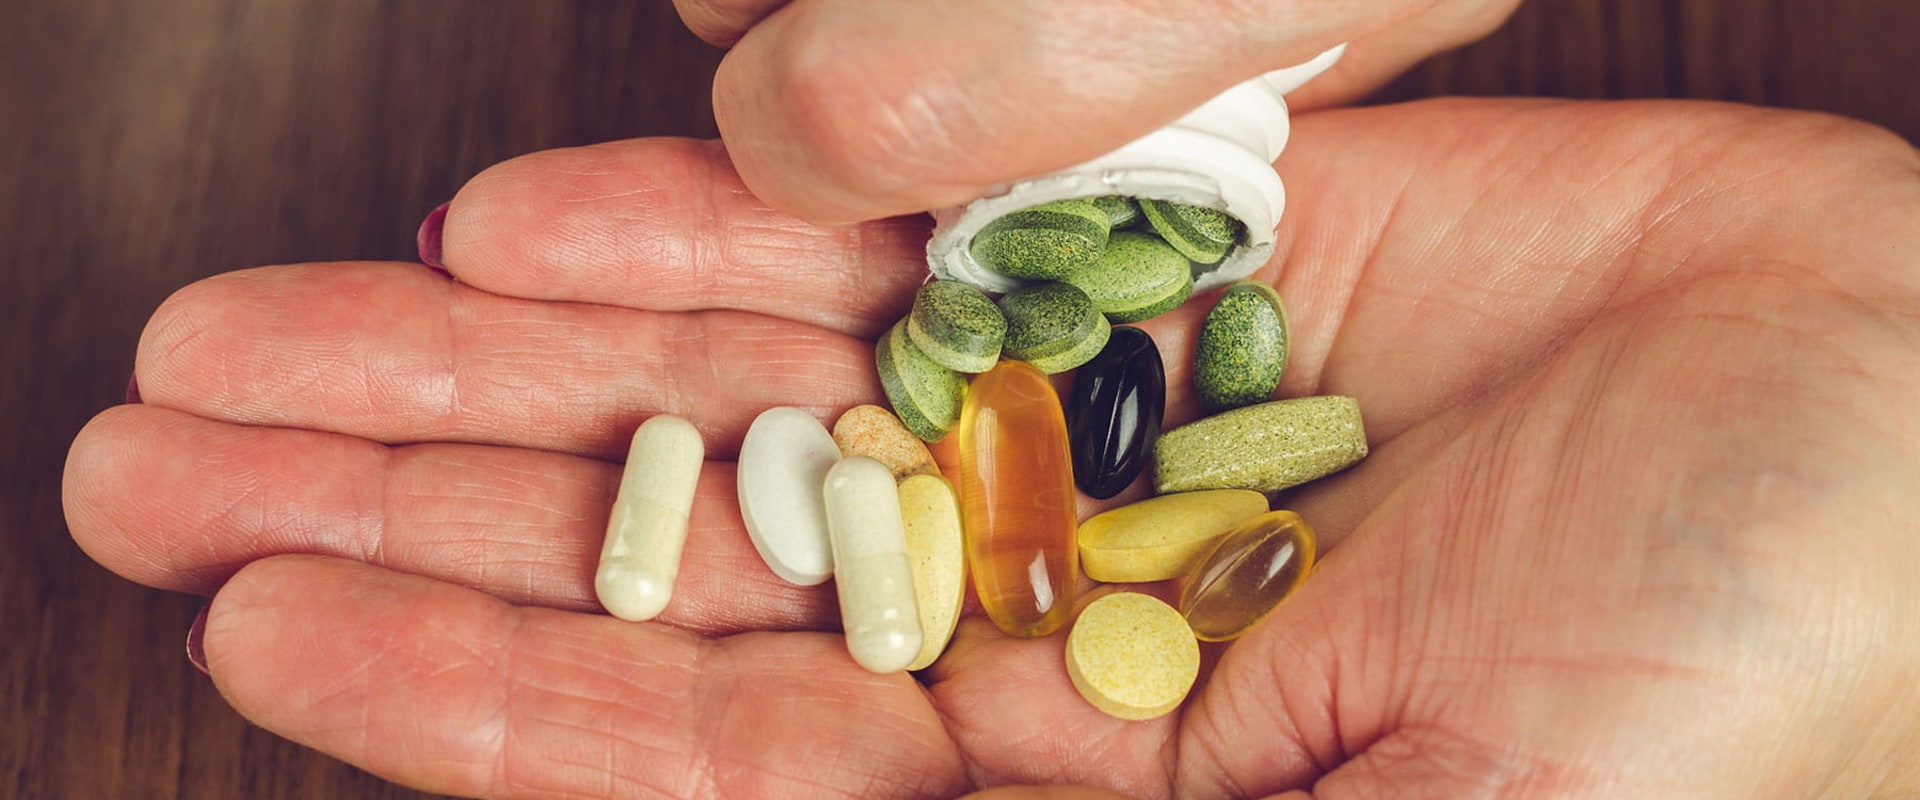 Can Kids Take Anti-Aging Supplements Safely?